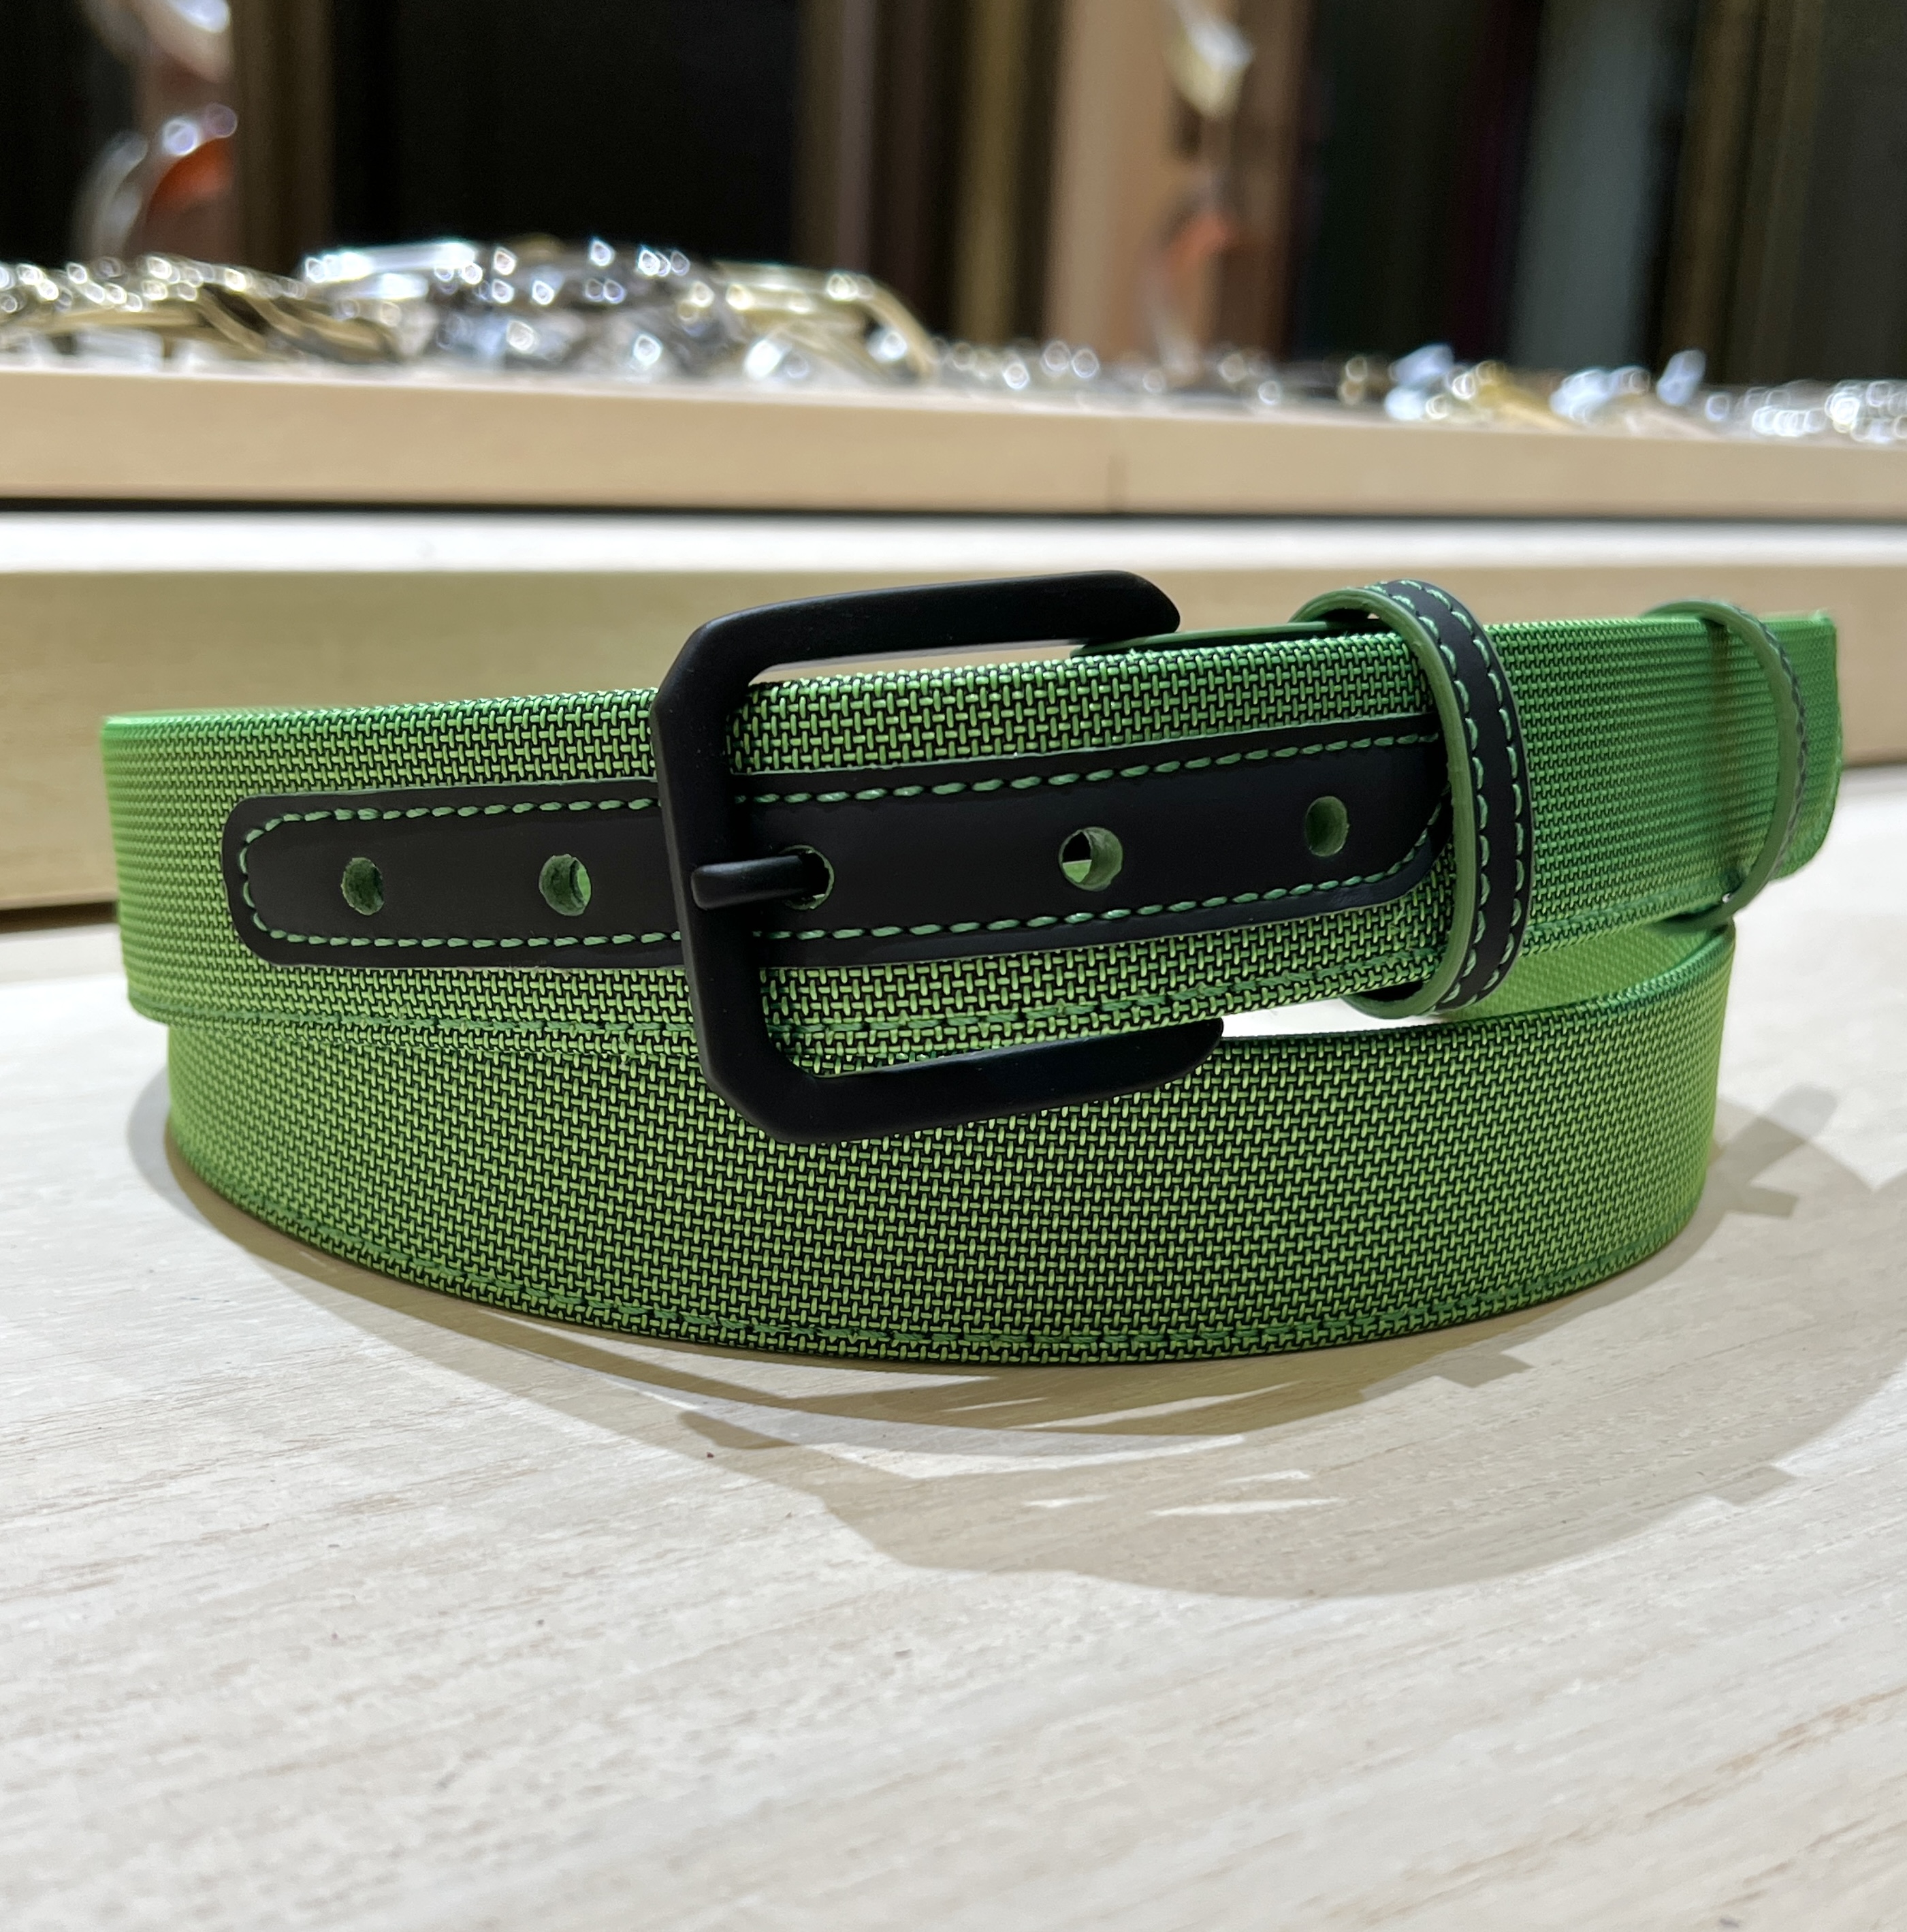 New colour of the Performance belt